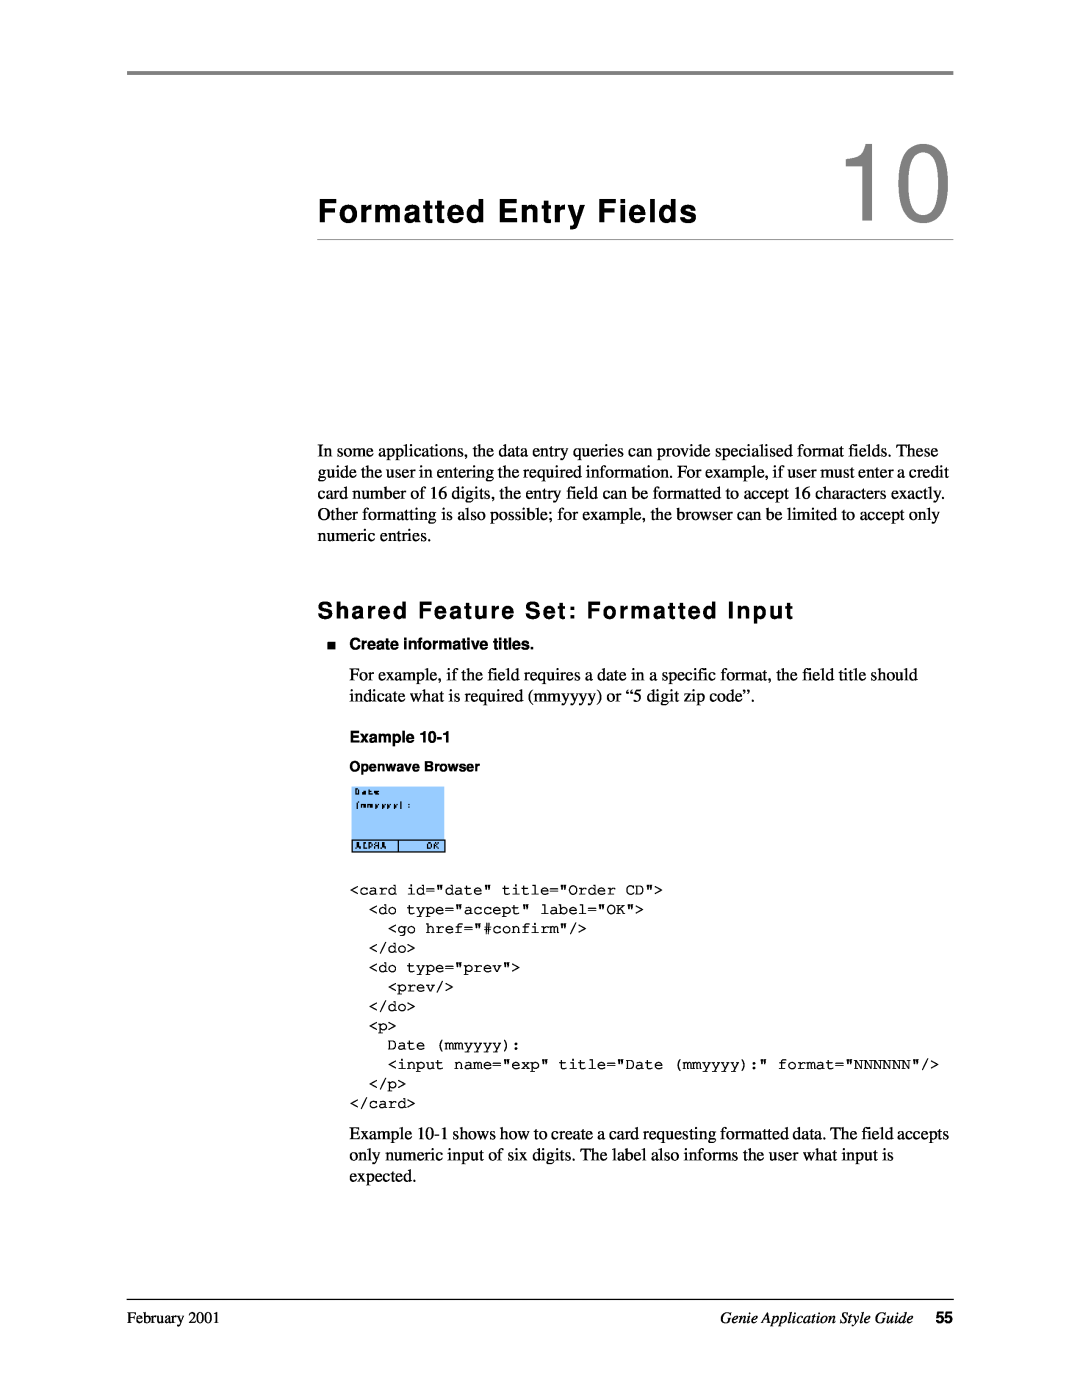 Genie 7110 manual Formatted Entry Fields, Shared Feature Set Formatted Input 